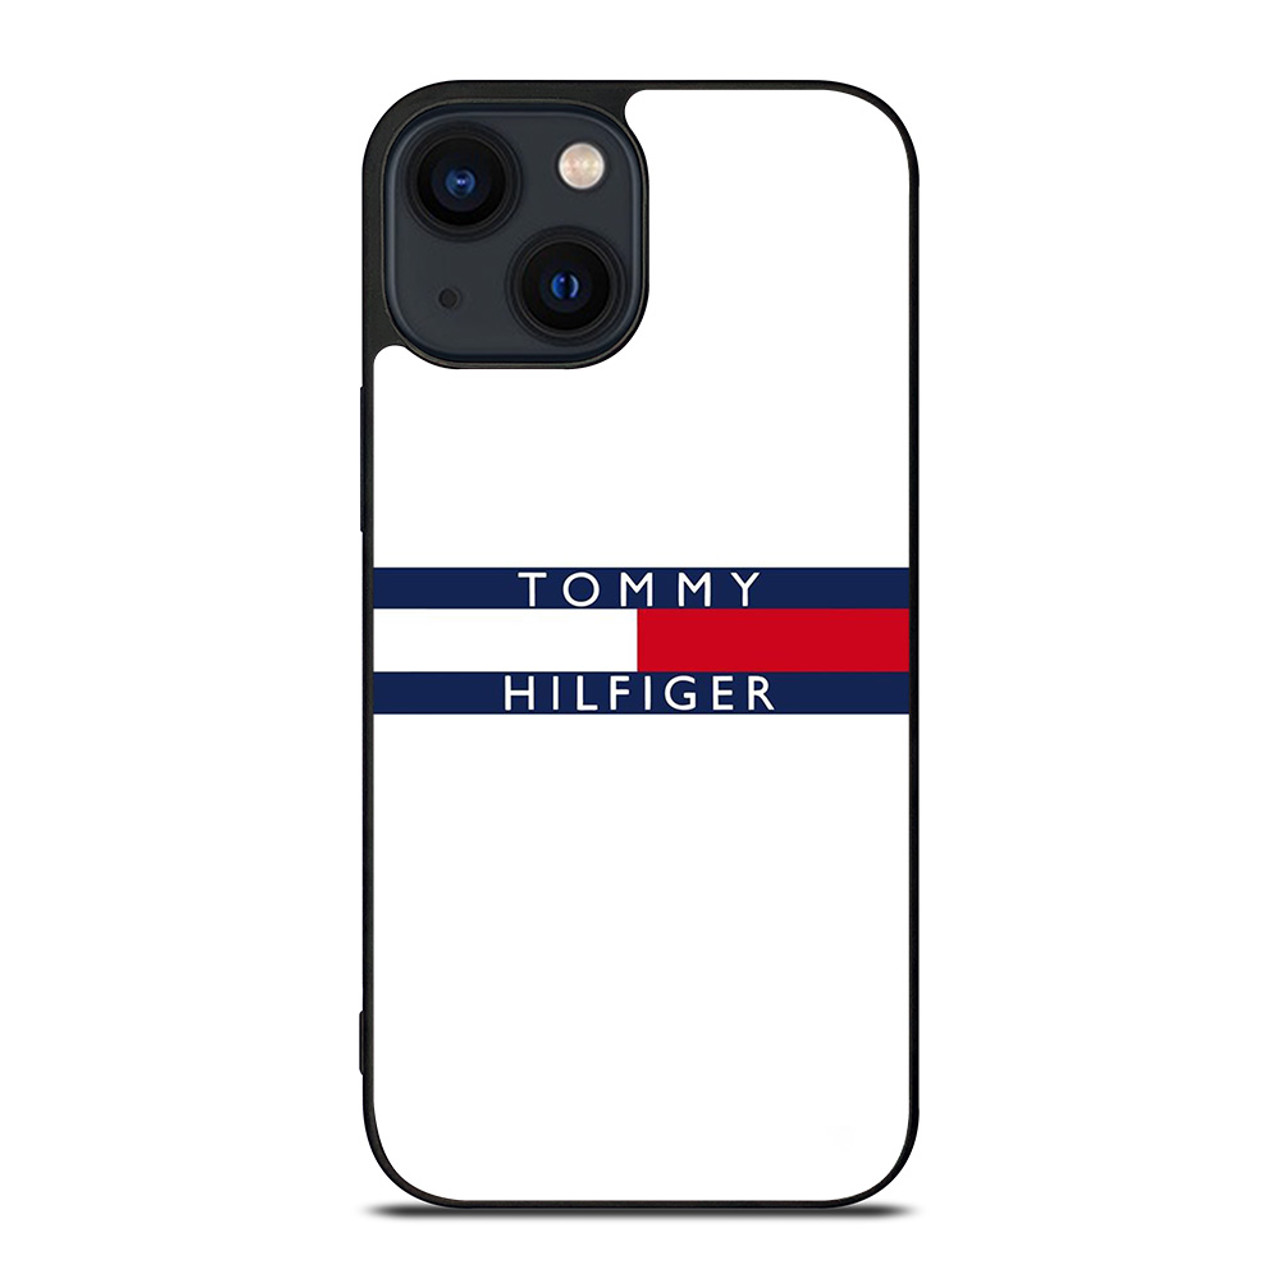 TOMMY HILFIGER WHITE 14 Case Cover